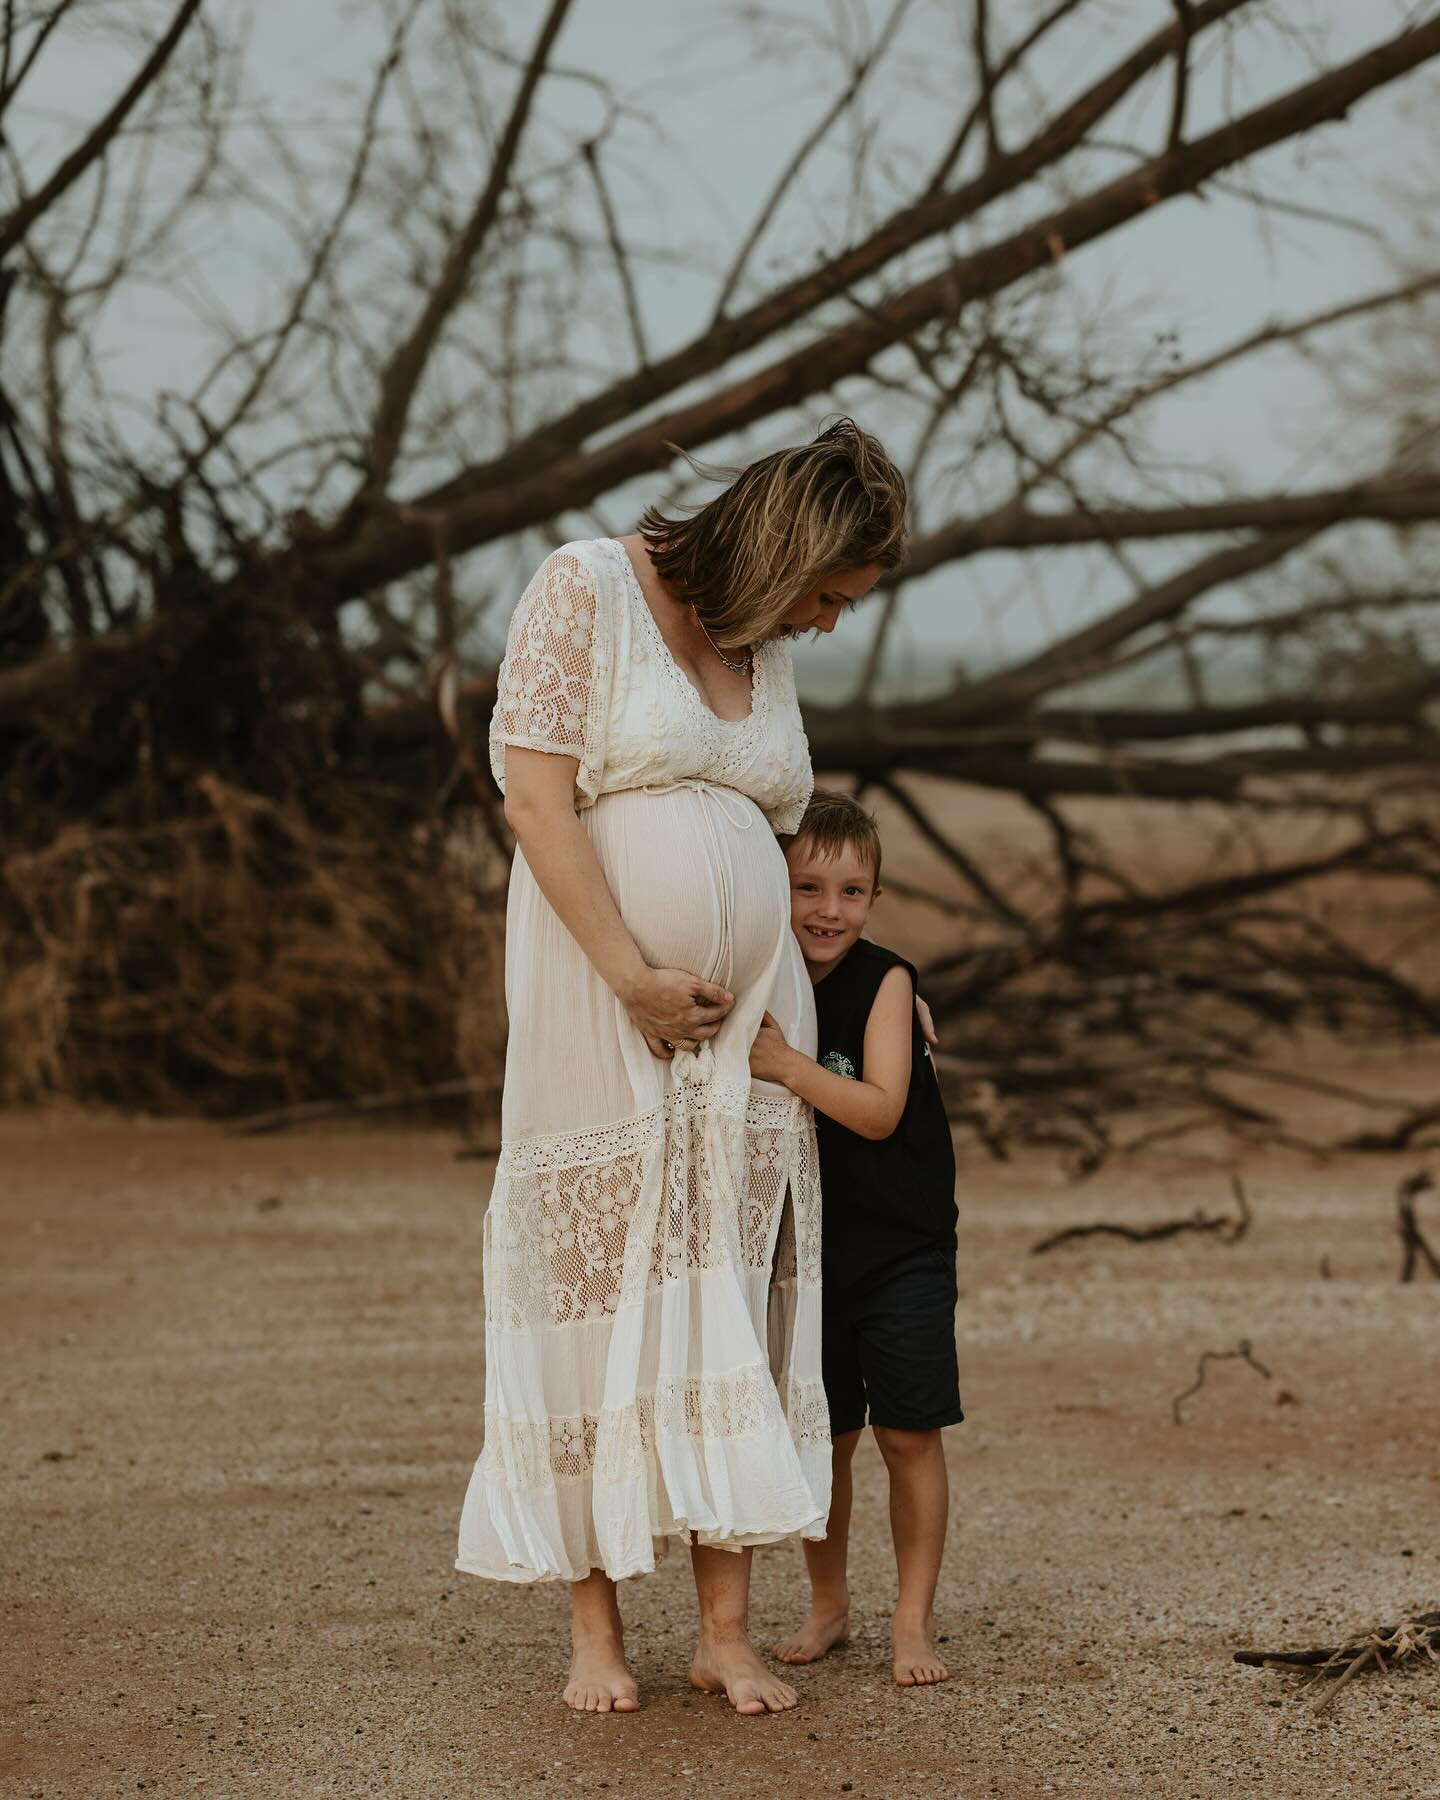 The third piece to their beautiful puzzle, what a lucky little babe to be joining this family full of love and adventure. 🥹🥰

#darwinphotographer #motherhoodunplugged #thestorytellingtribe
#unscriptedposingapp
#theimperfectlyperfectmoments #storyte